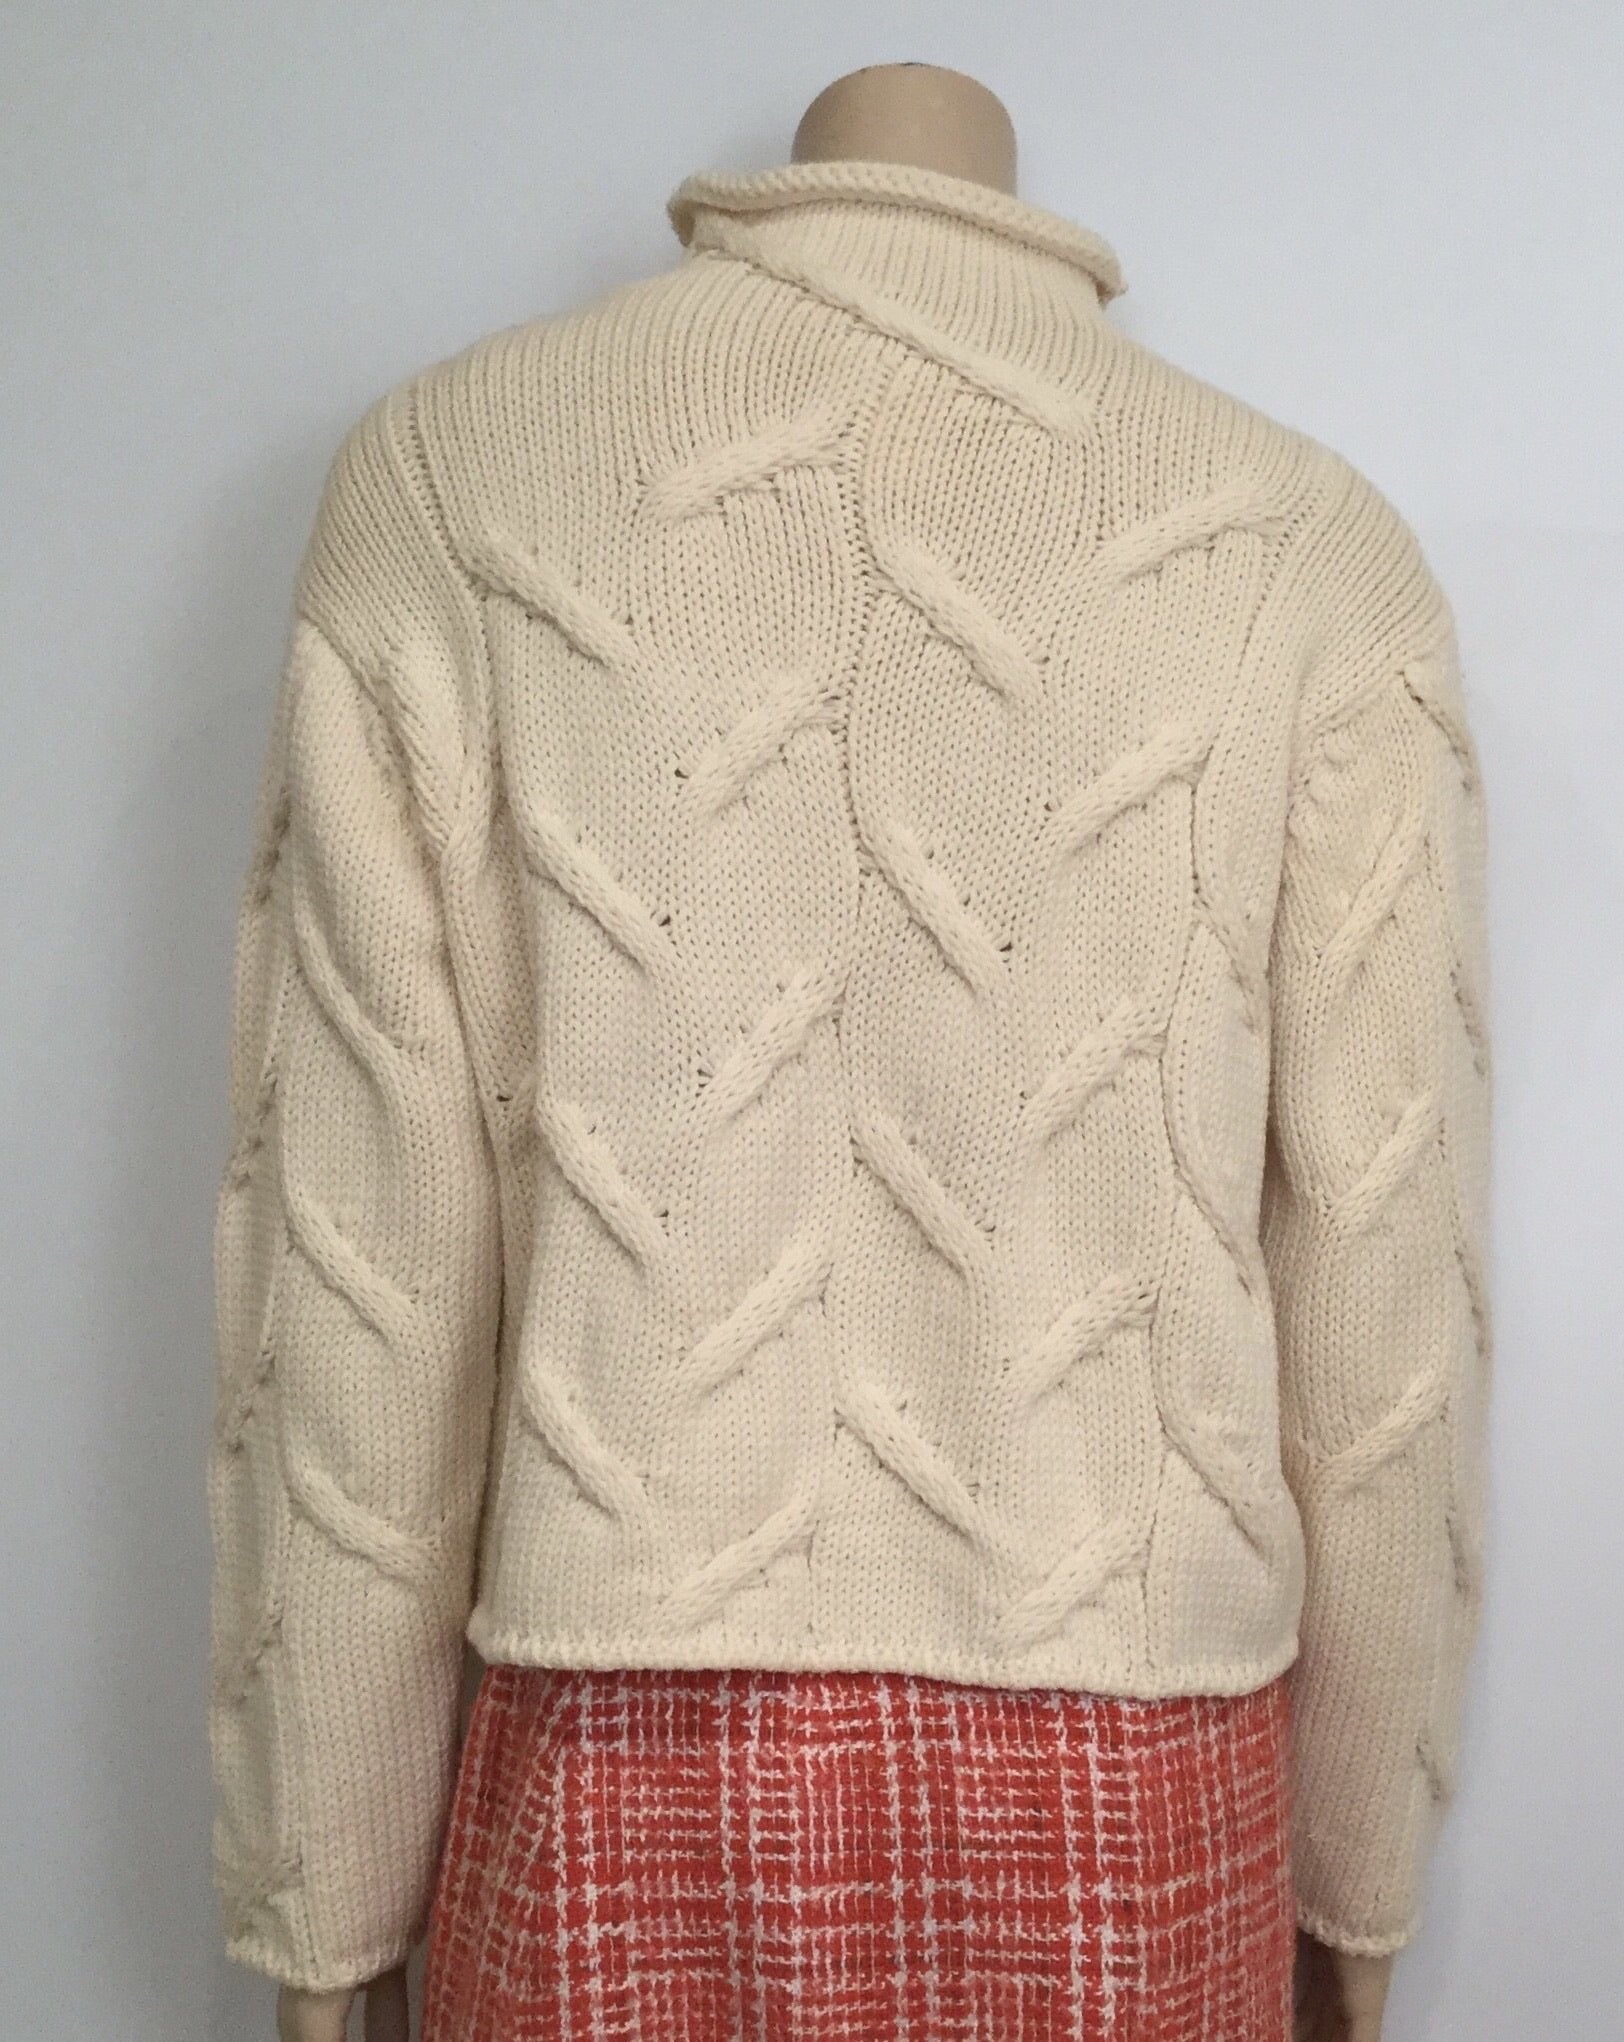 HelensChanel Vintage Chanel 99A, 1999 Fall Winter White Ivory Ecru Cable Knit Wool Sweater FR 40 US 6/8